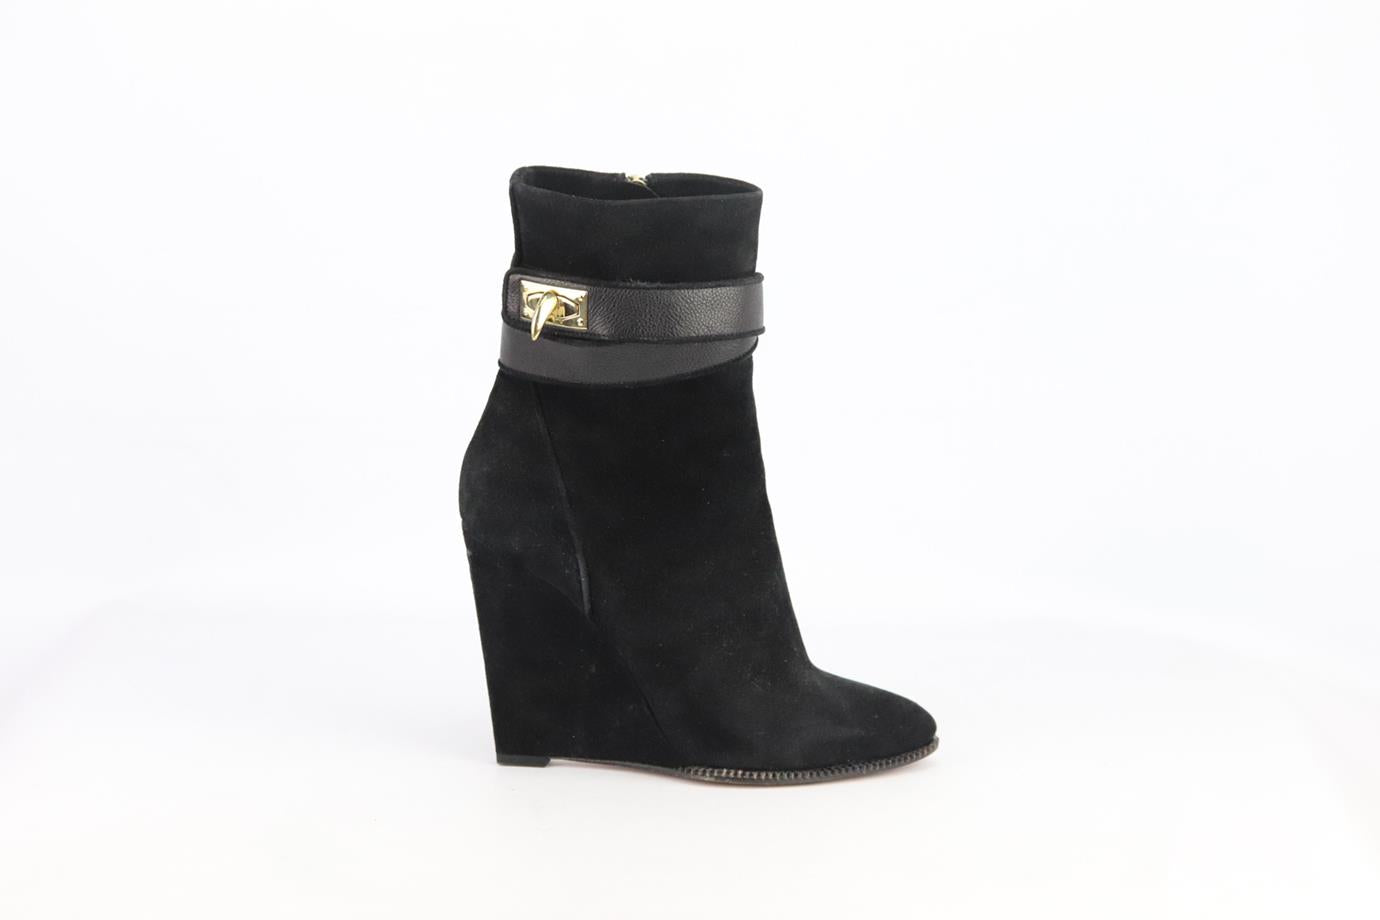 GIVENCHY SHARK LOCK SUEDE WEDGE ANKLE BOOTS EU 38 UK 5 US 8